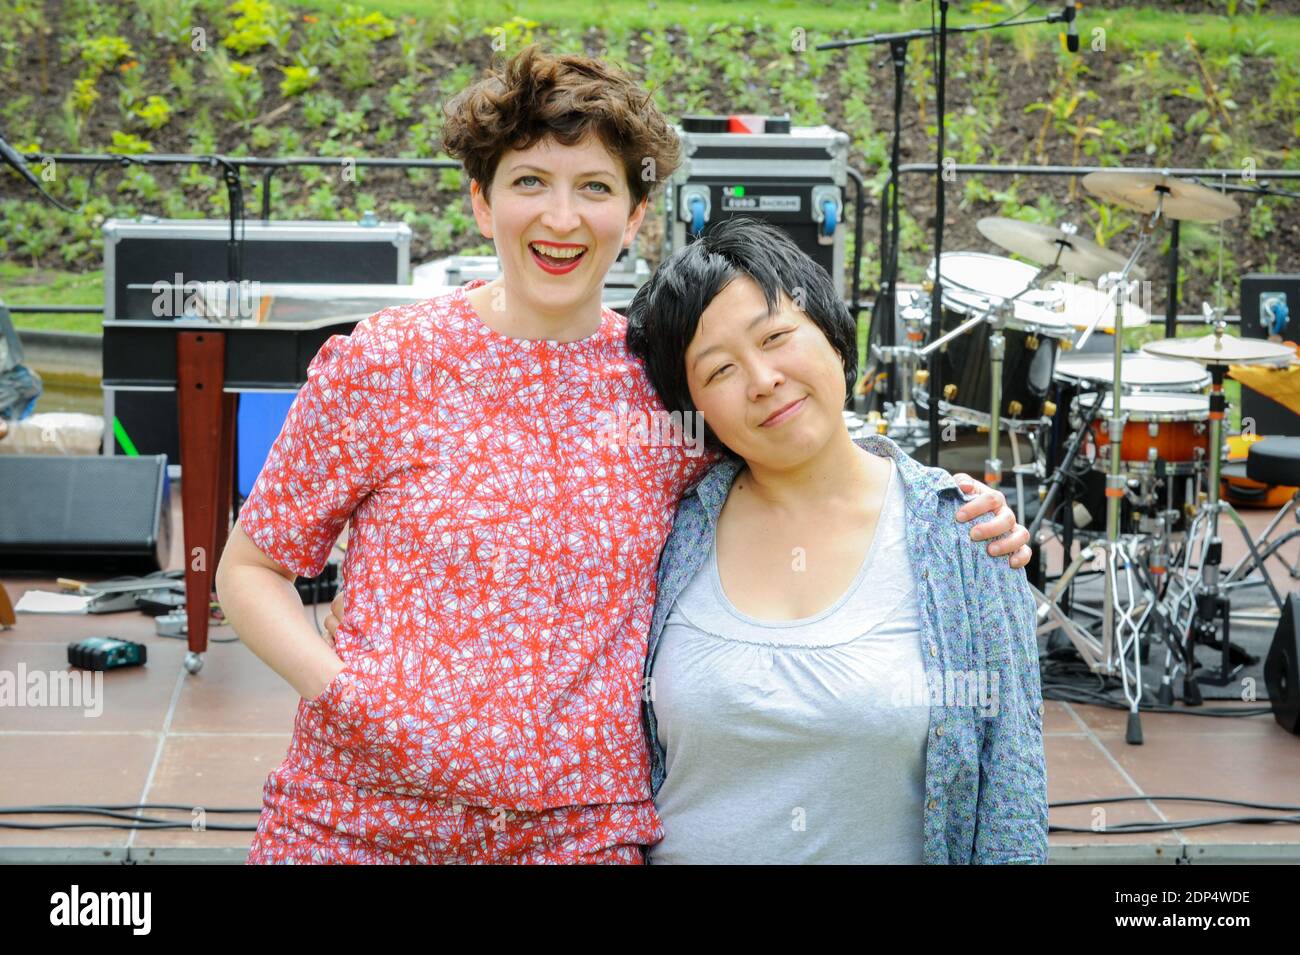 Eve Risser and Yuko Oshima of Donkey Monkey band perform during the 21th  Paris Jazz Festival 2015 at Parc Floral in Paris, France. on June 21, 2015.  Photo by Karine Mahiout/ABACAPRESS.COM Photo